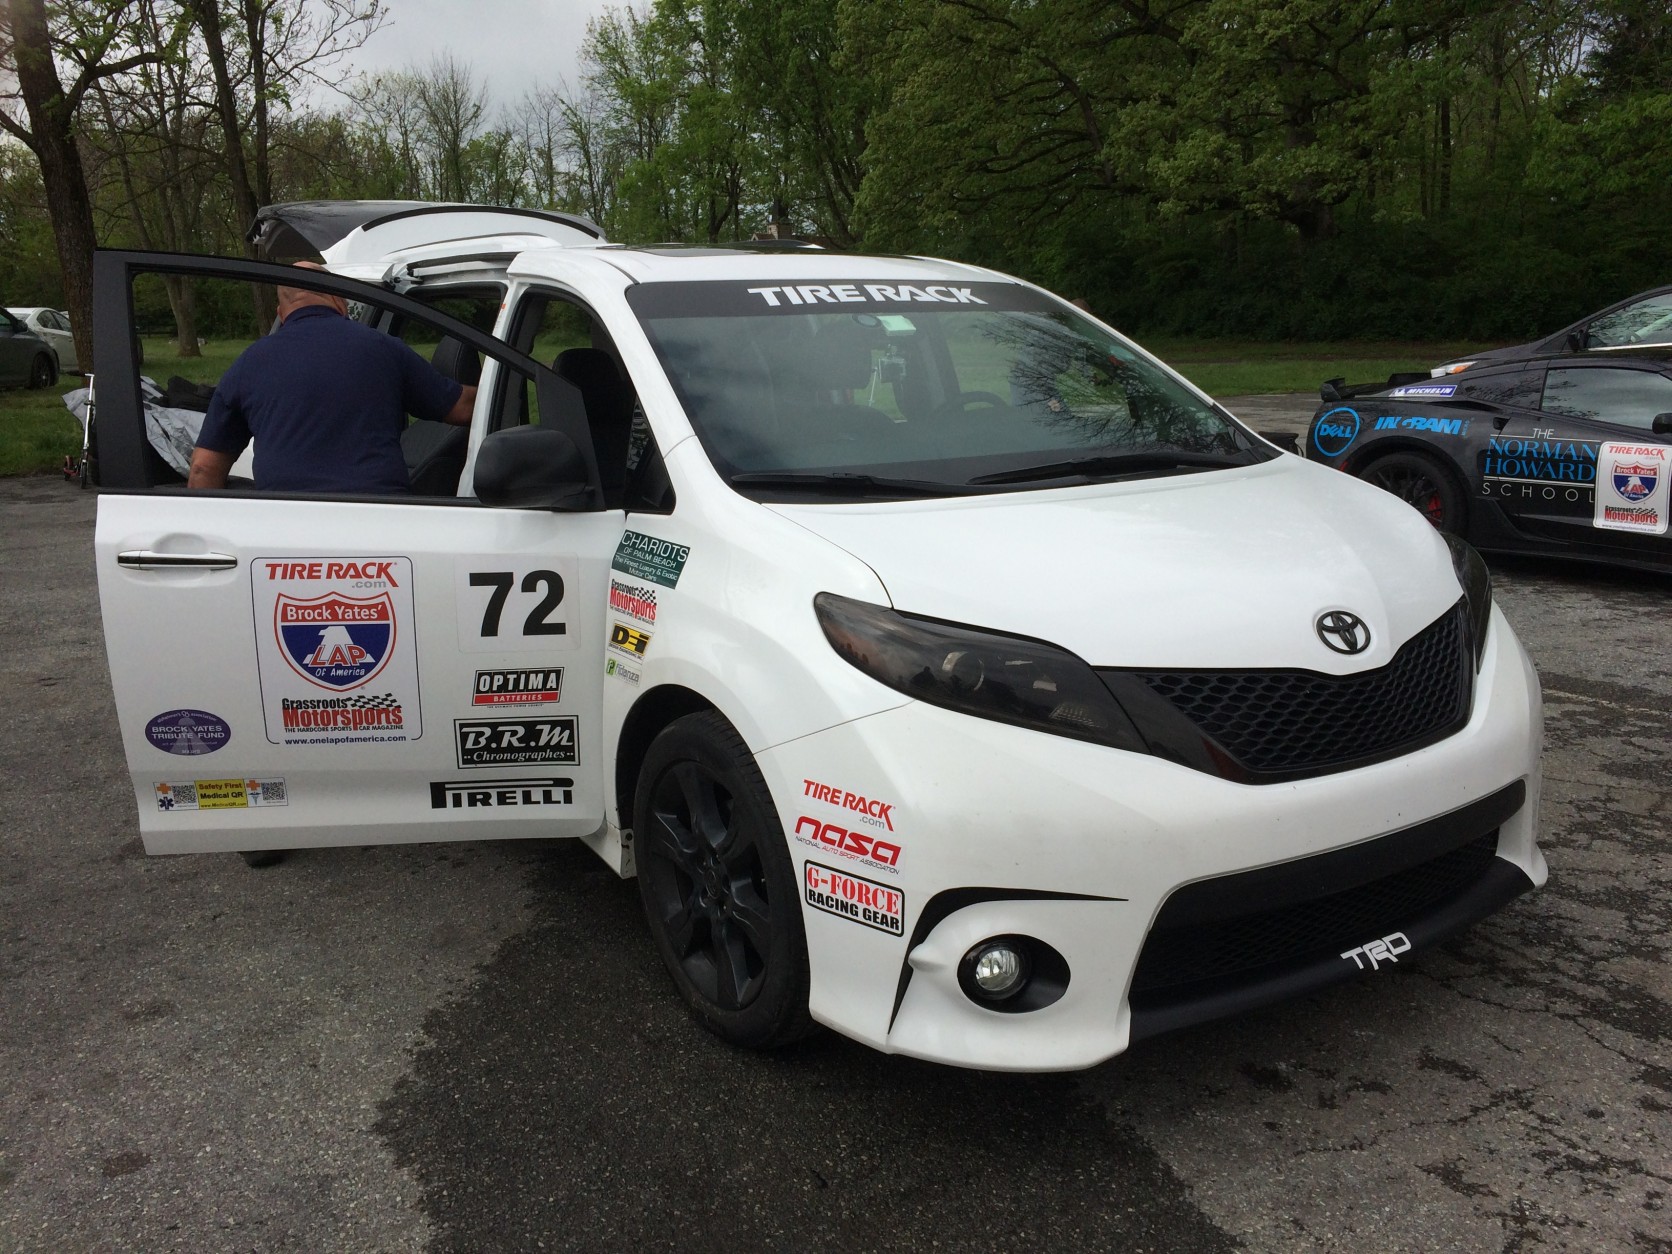 Toyota Sienna SE+ is one of two Sienna minivan models to compete at the One Lap of America Race. (WTOP/Mike Parris)